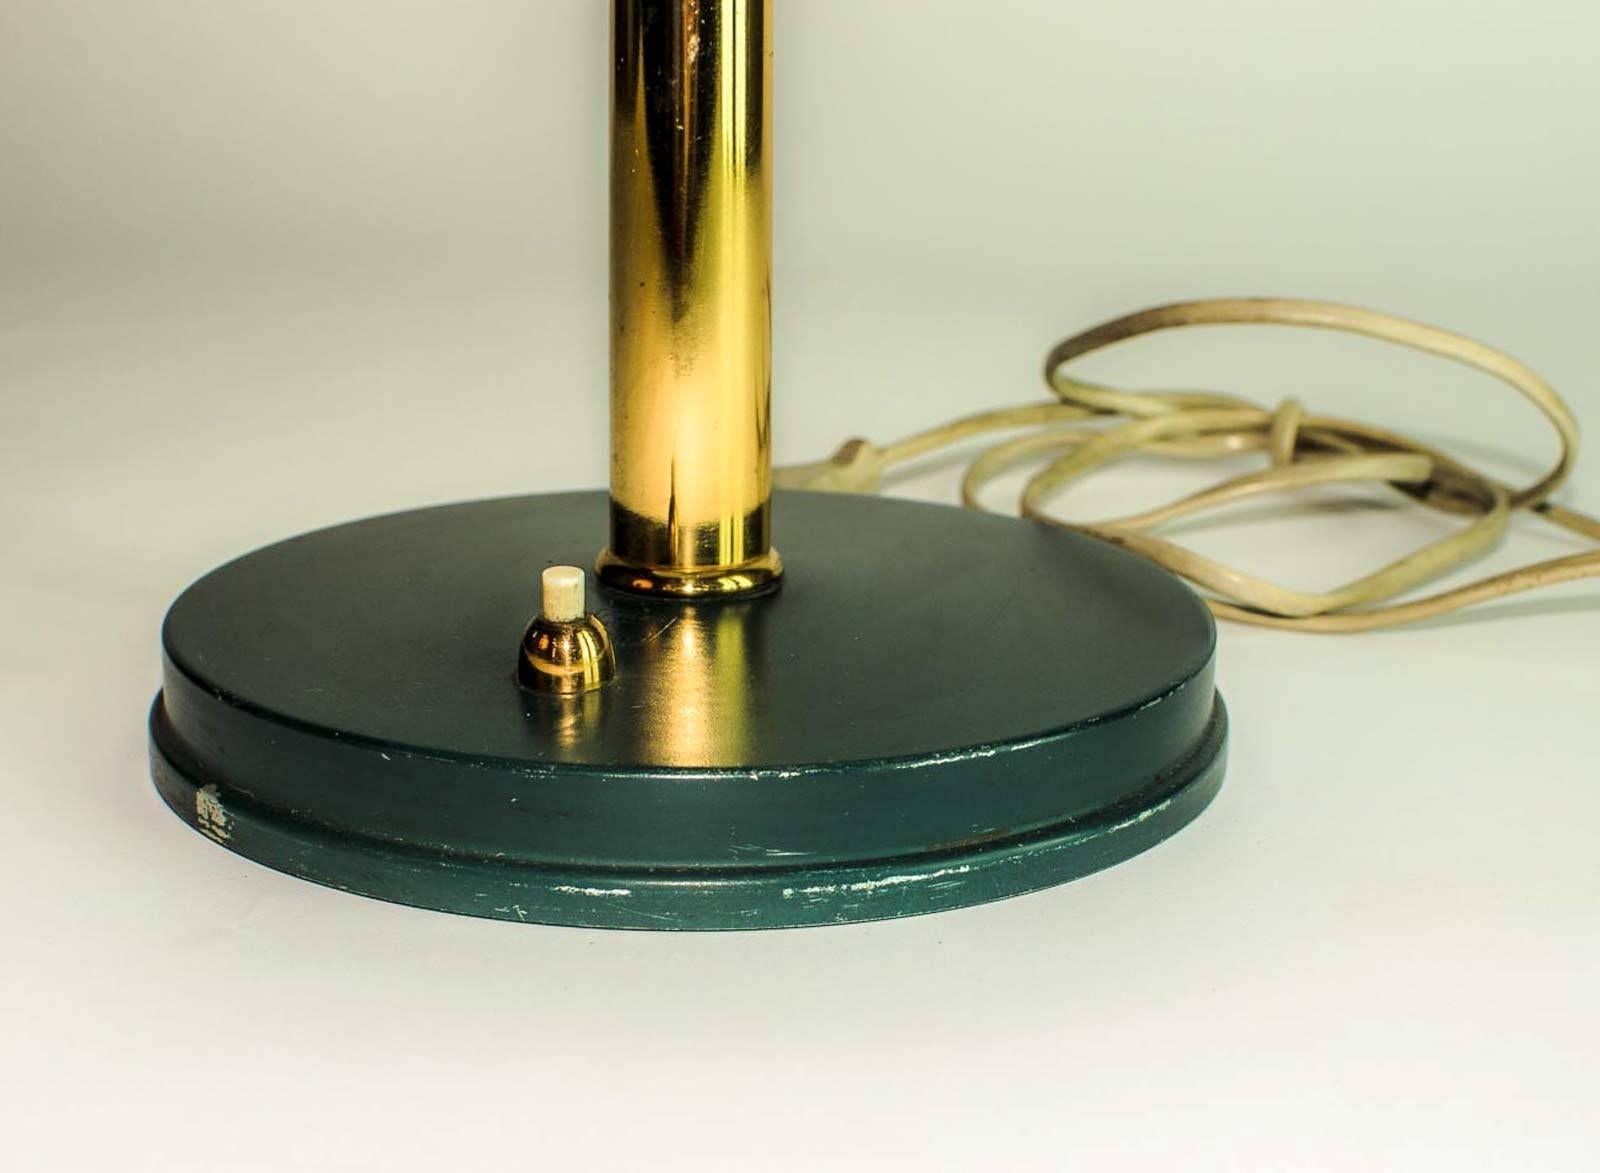 Pair of Timor 69 Table Lamps in Dark Green and Brass by Louis Kalff for Philips 1